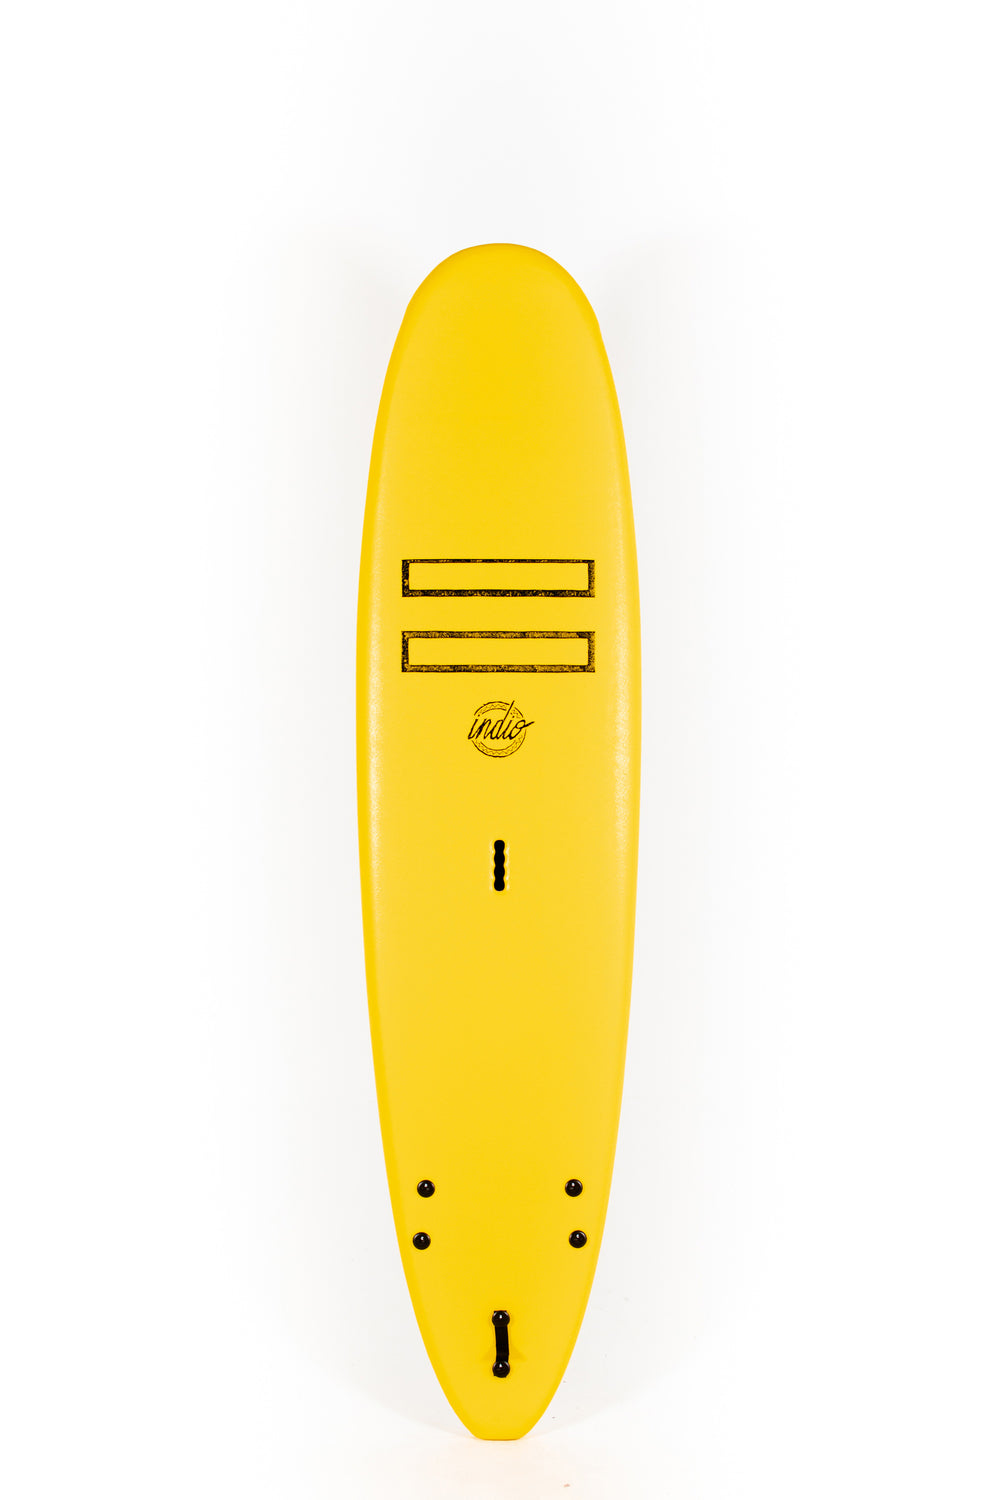 Pukas-Surf-Shop-Indio-Surfboards-Softboards-Step-Up